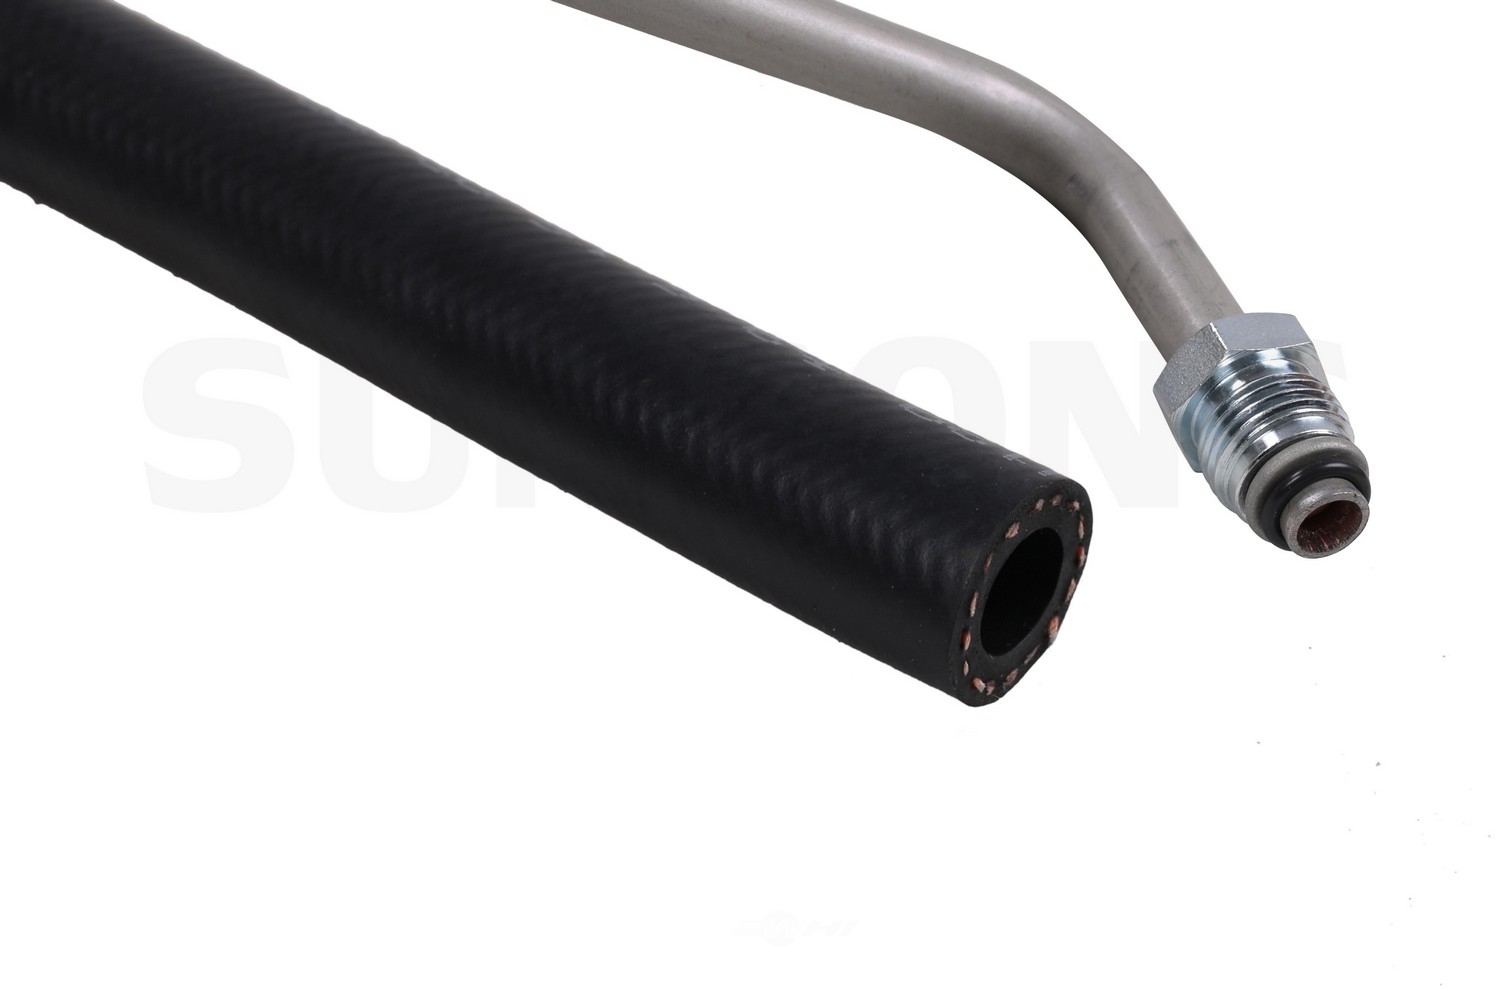 SUNSONG NORTH AMERICA - Power Steering Hose Assembly - SUG 3403227